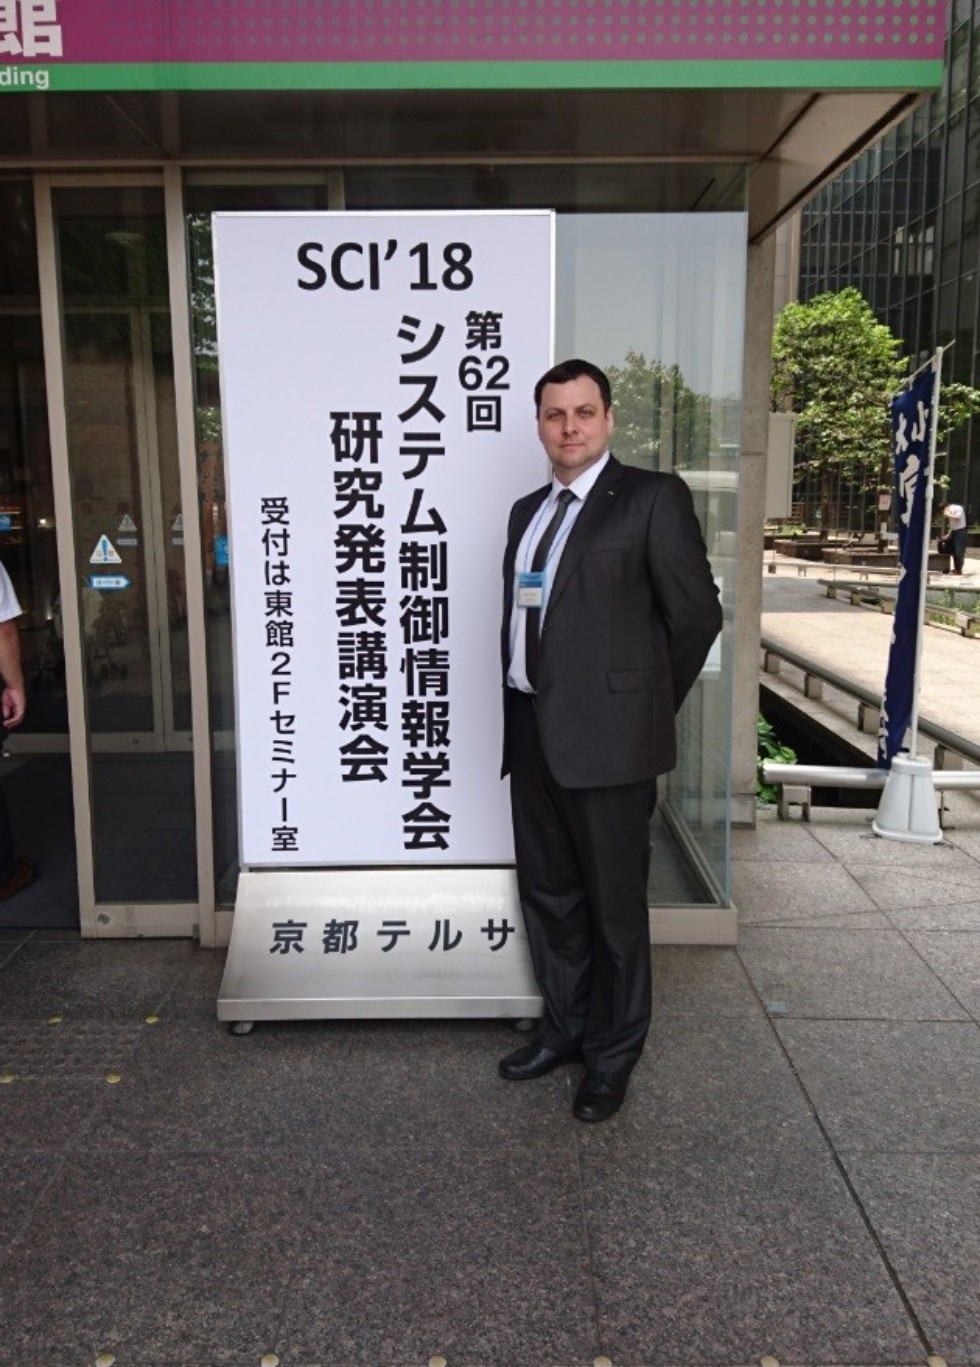 LIRS made research reports on swarm robotics at the International Conference on Systems, Control and Information Engineers in Japan